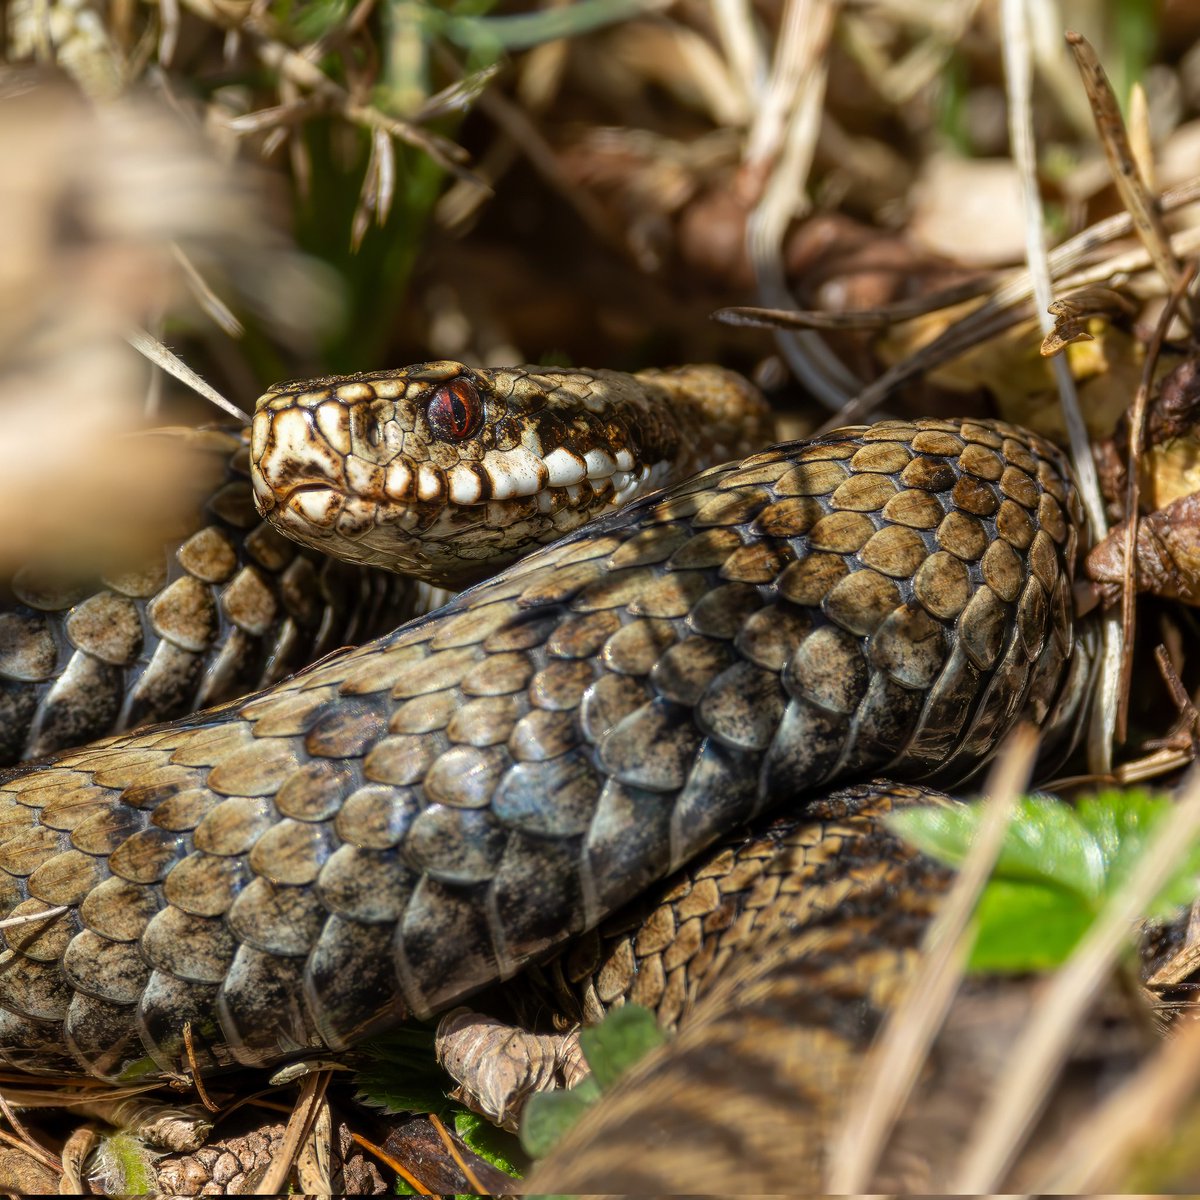 Cracking weekend in the #forestofdean with @naturetrek_wildlife_holidays . We had a lot of snow, but saw most of the key species including Goshawk, Crossbill, Hawfinch, Wild Boar and this beautiful female Adder.